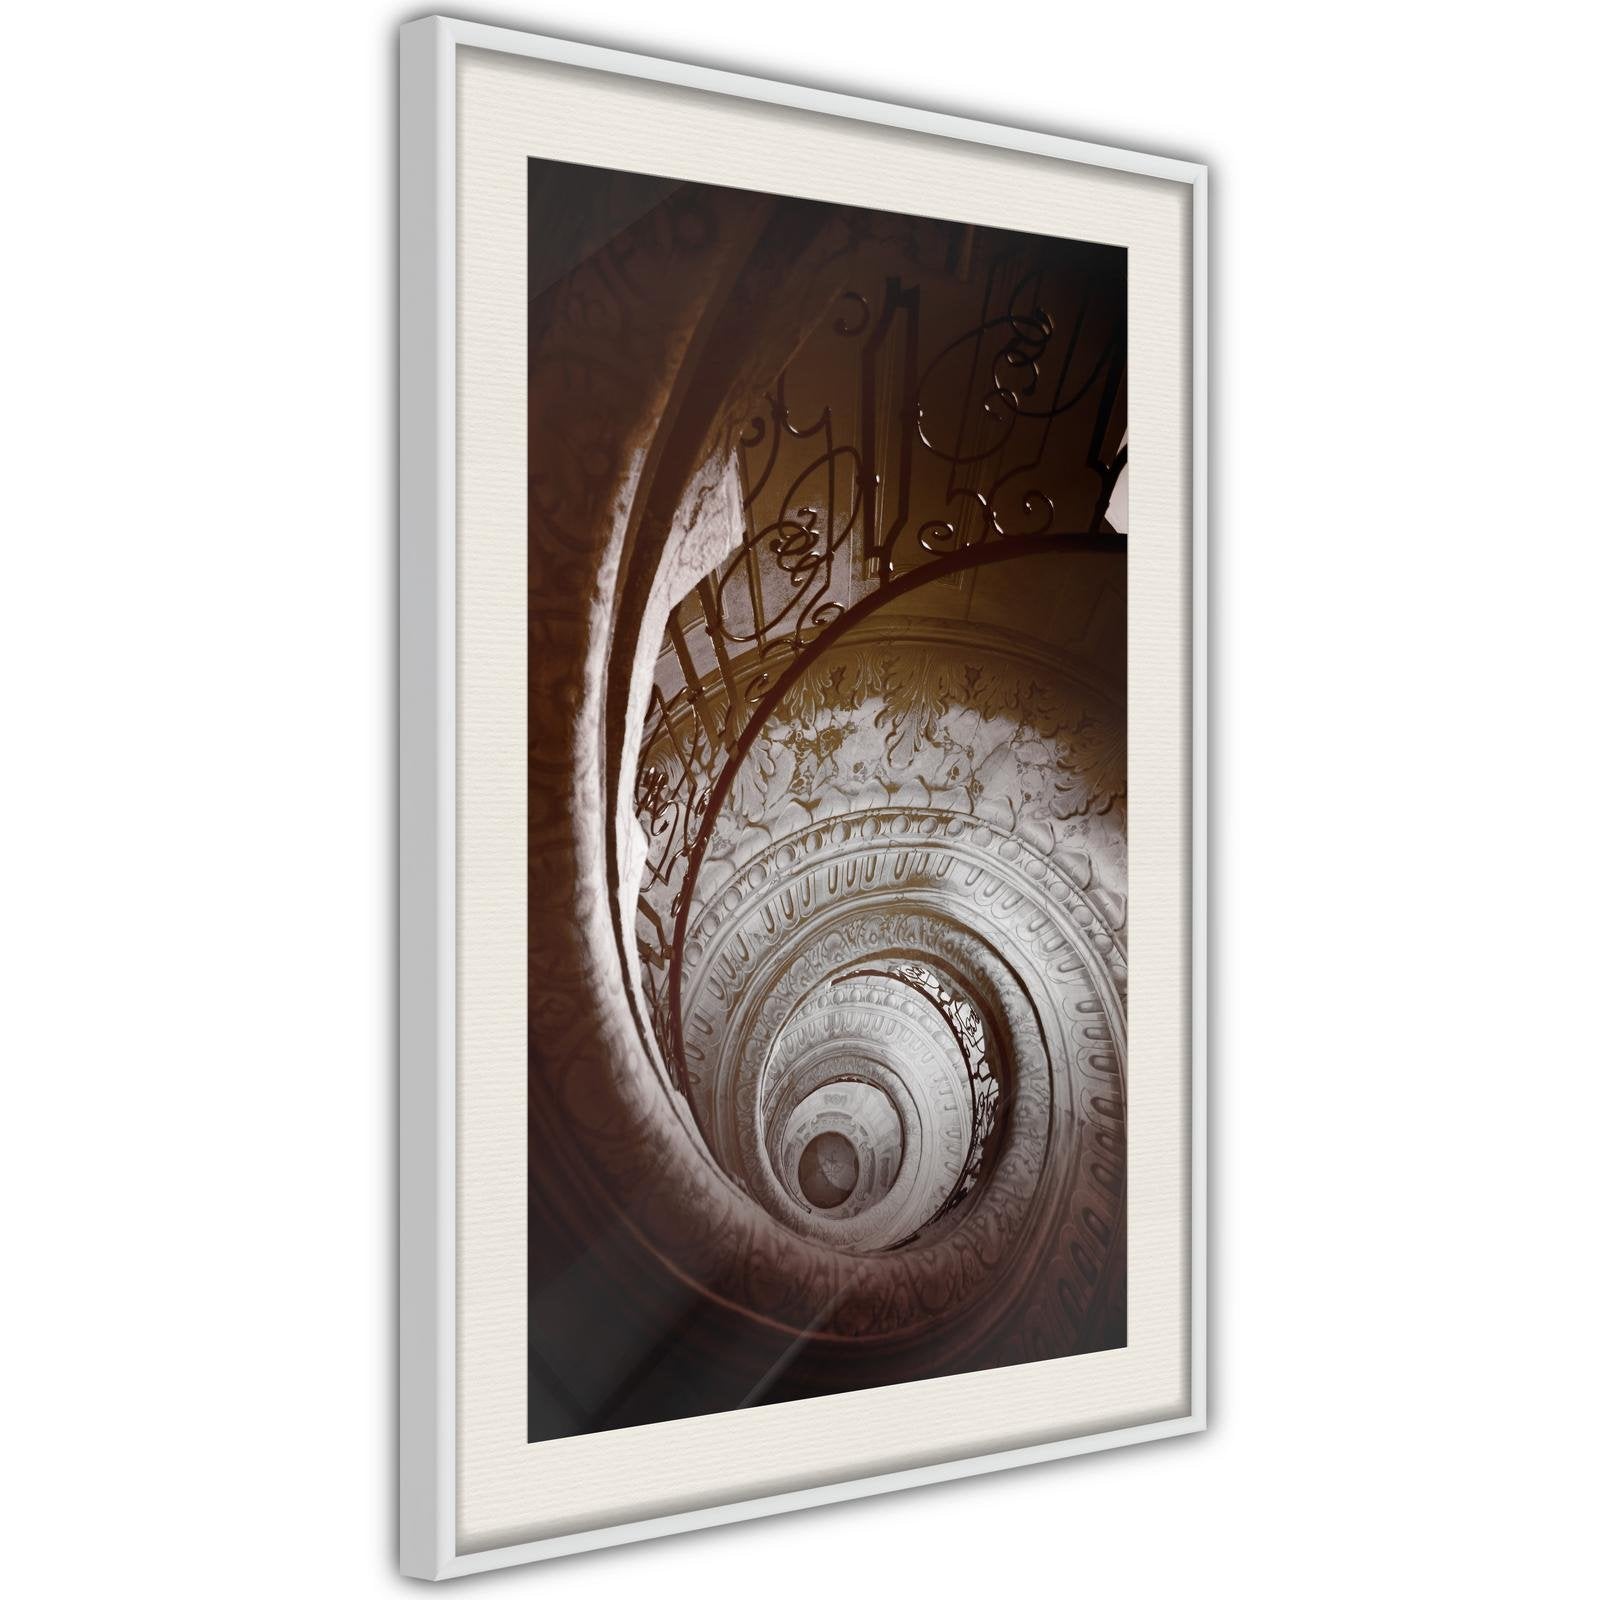 Inramad Poster / Tavla - Winding Staircase-Poster Inramad-Artgeist-peaceofhome.se